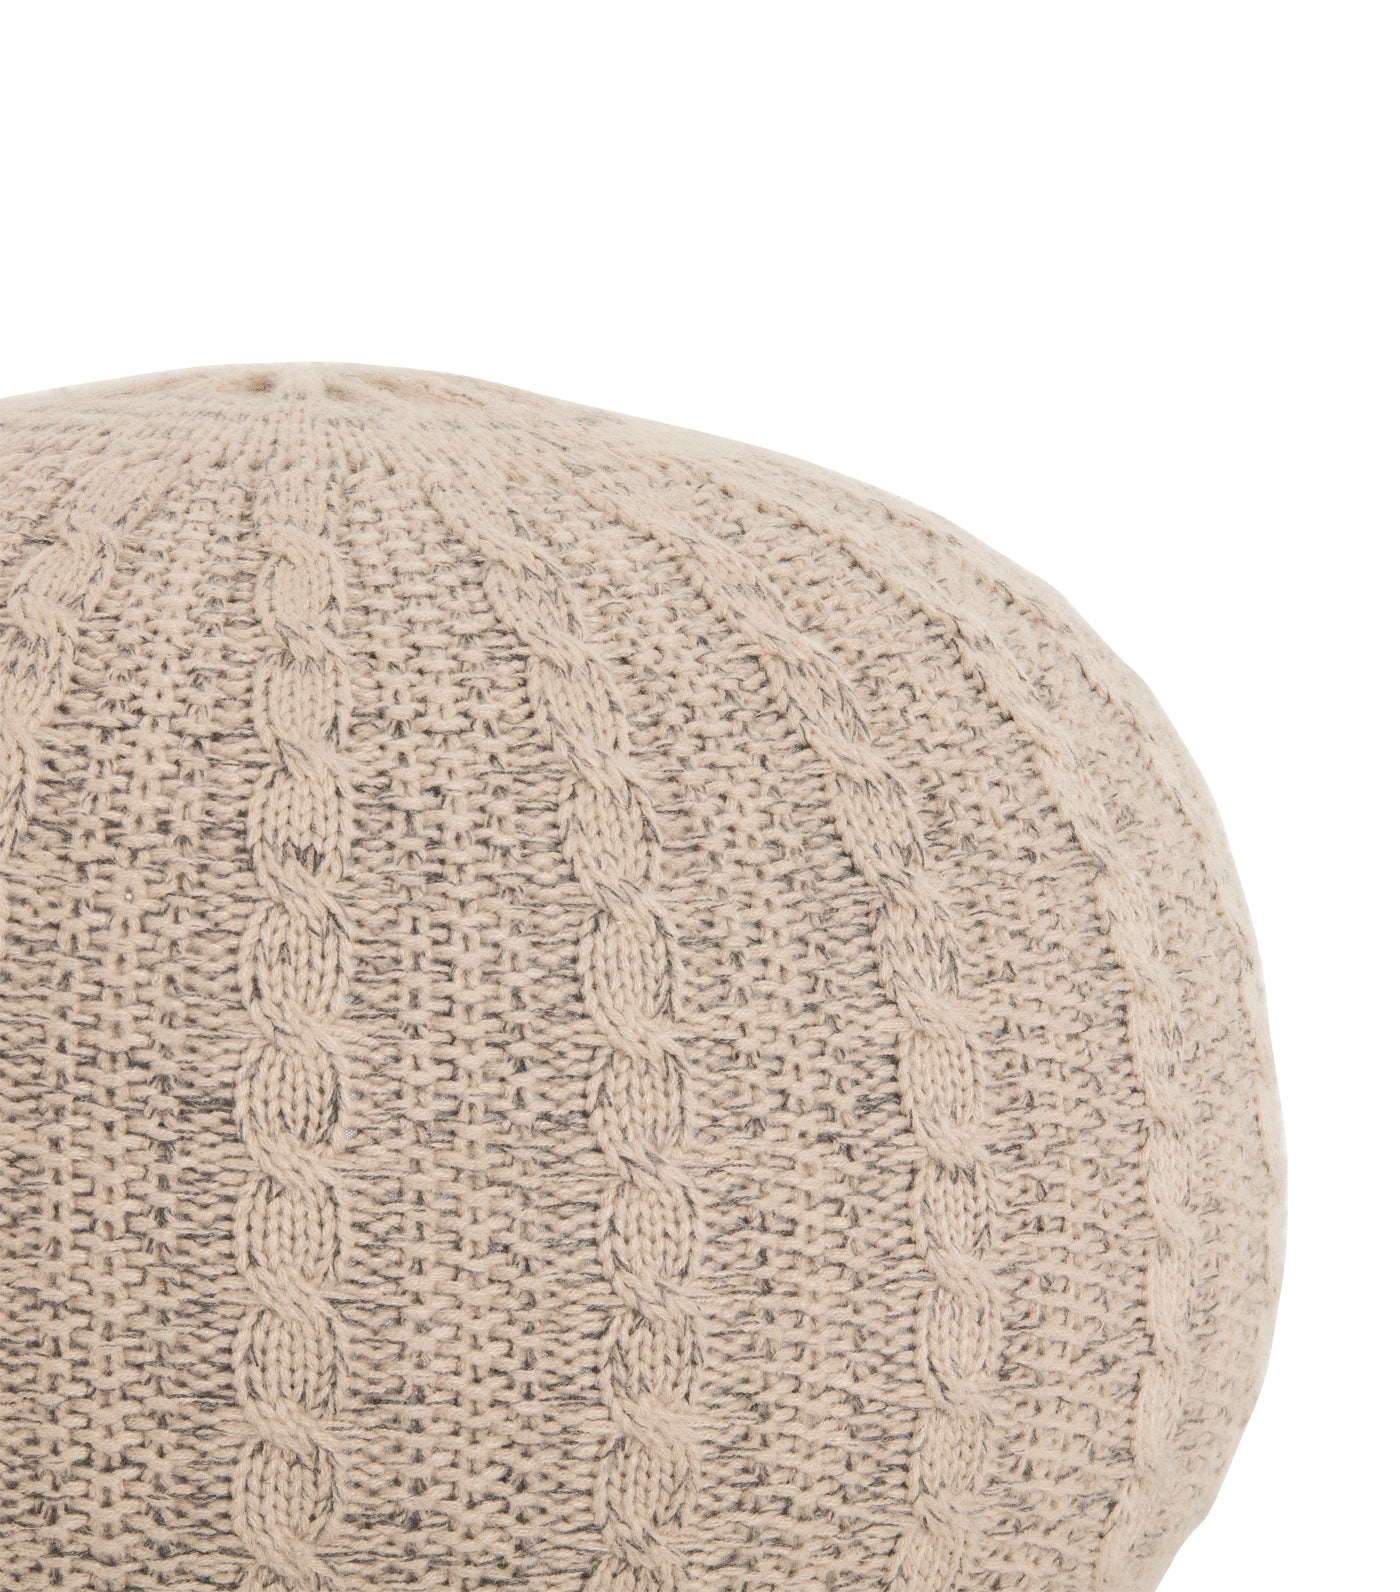 Knitted Pouffe - Natural/Stone